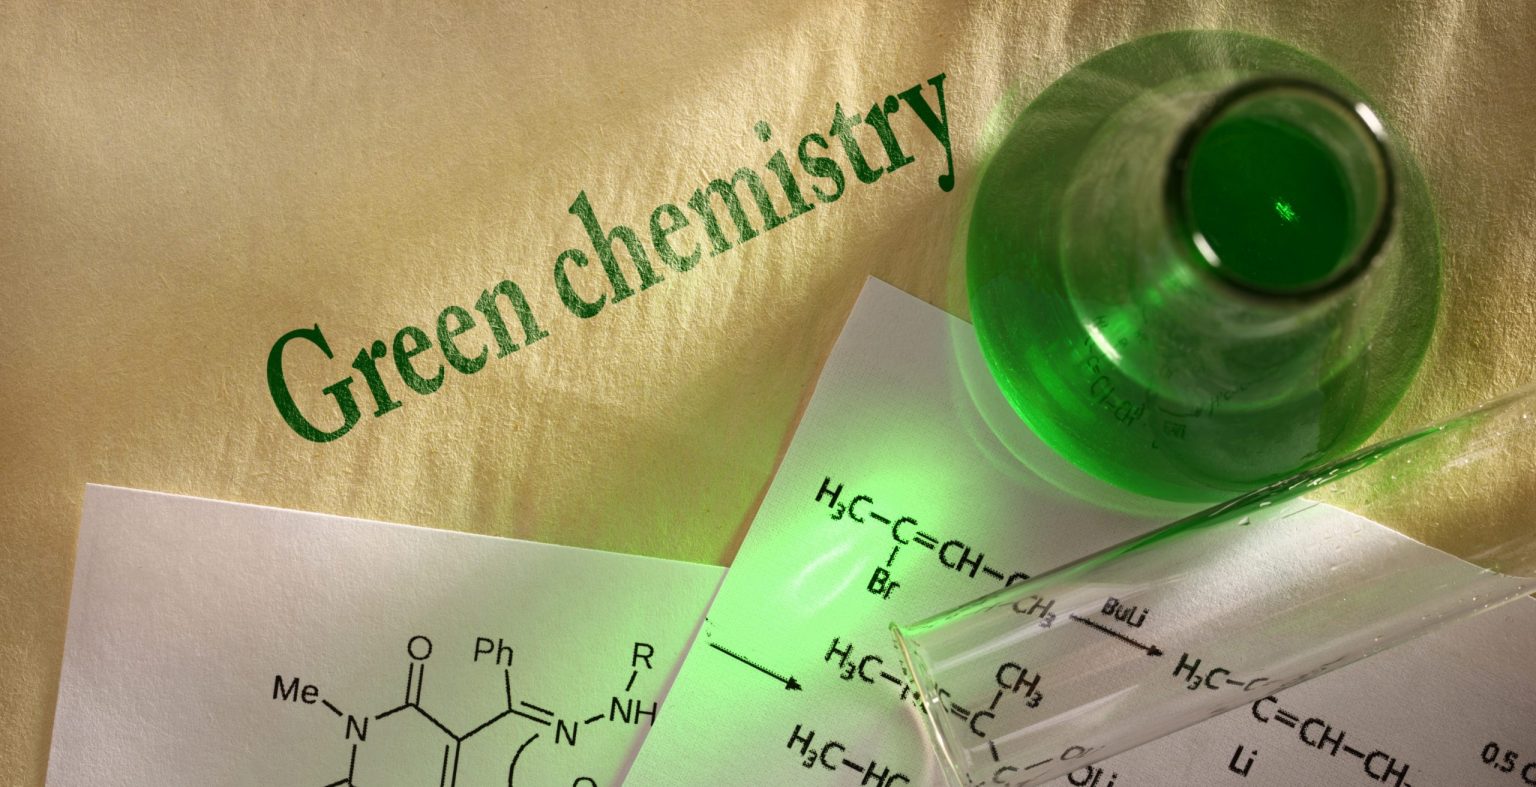 research topics in environmental chemistry